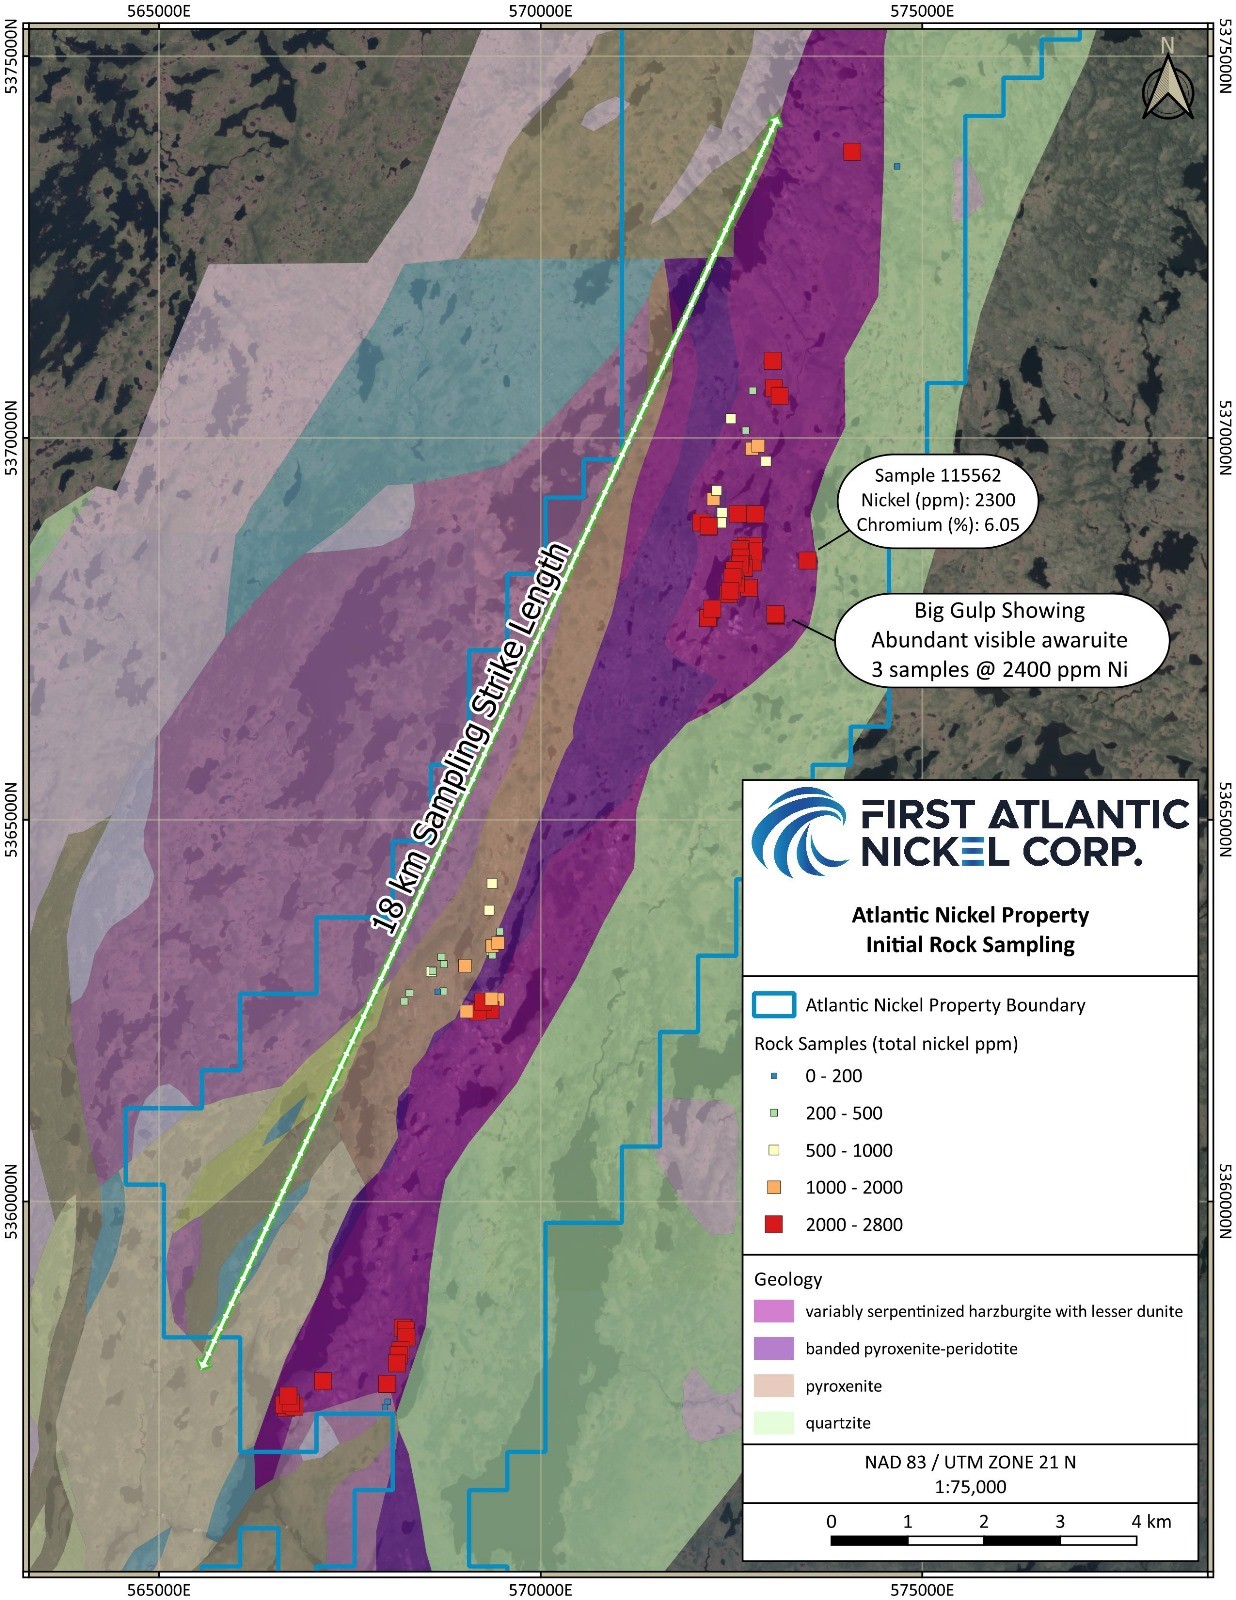 Atlantic Nickel Project geology map with initial rock samples confirming high nickel values shown extending through the bottom 18 km of the overall 30 km trend.